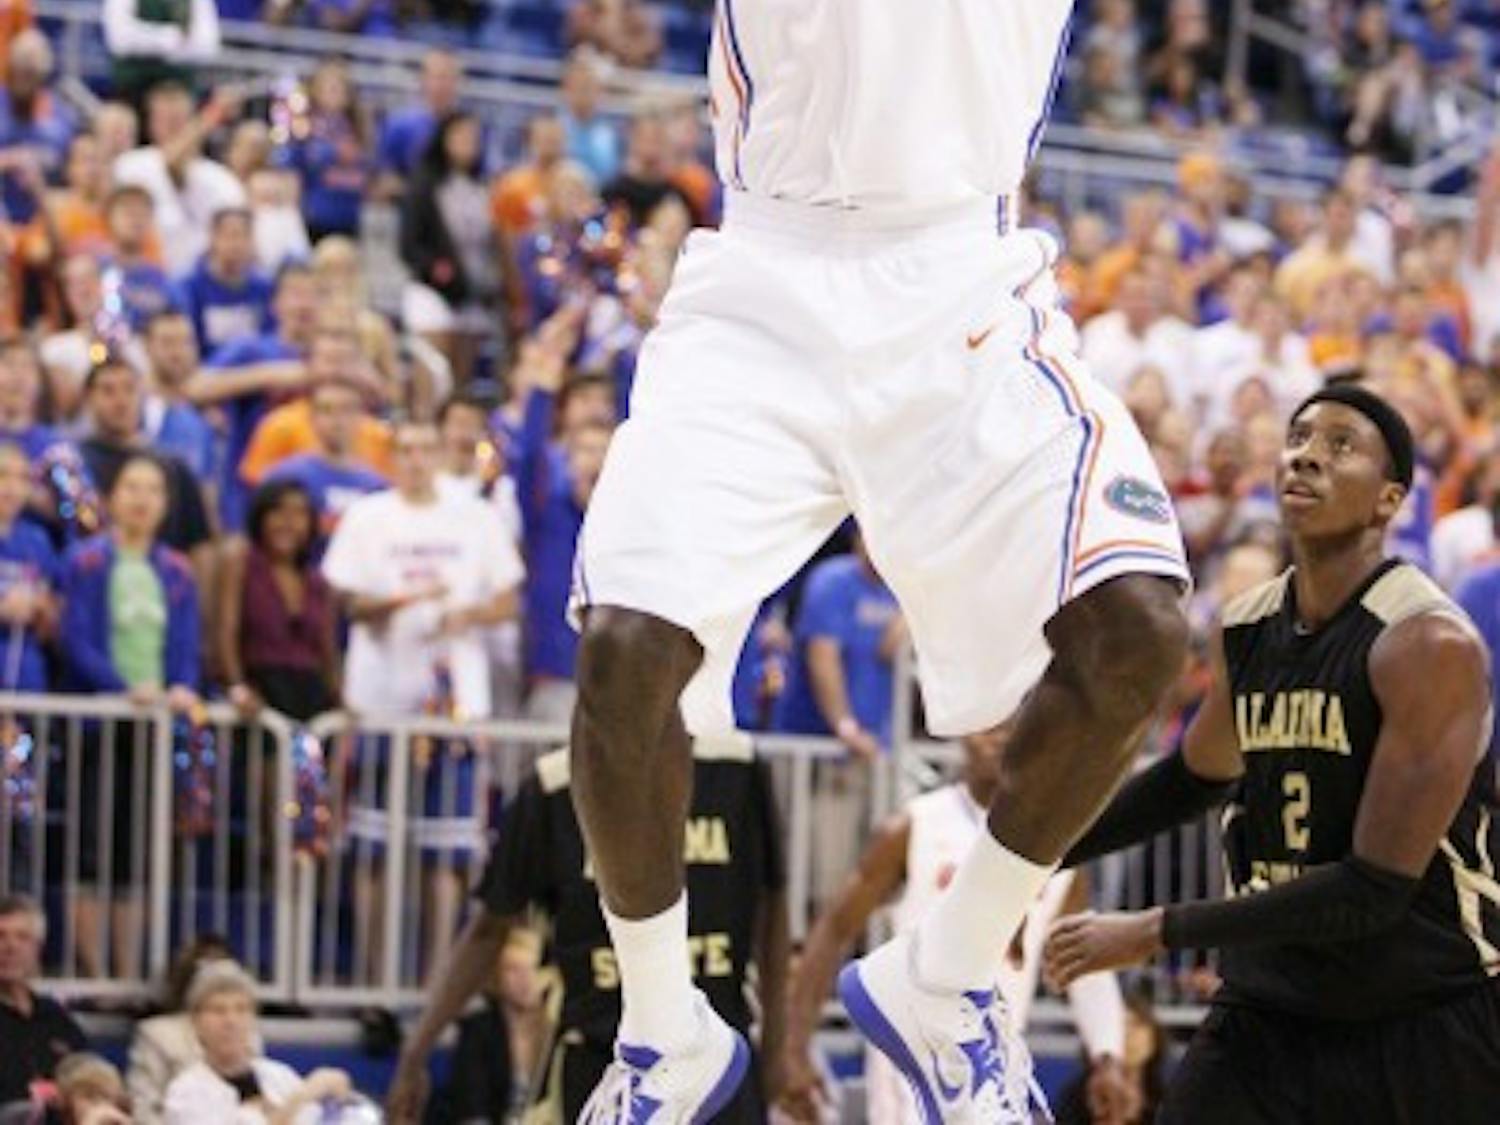 Florida center Patric Young (4) dunks the ball during an 84-35 win&nbsp; against Alabama State on Nov. 11 at the O’Connell Center. Young scored 12 points and grabbed 12 rebounds in the victory.